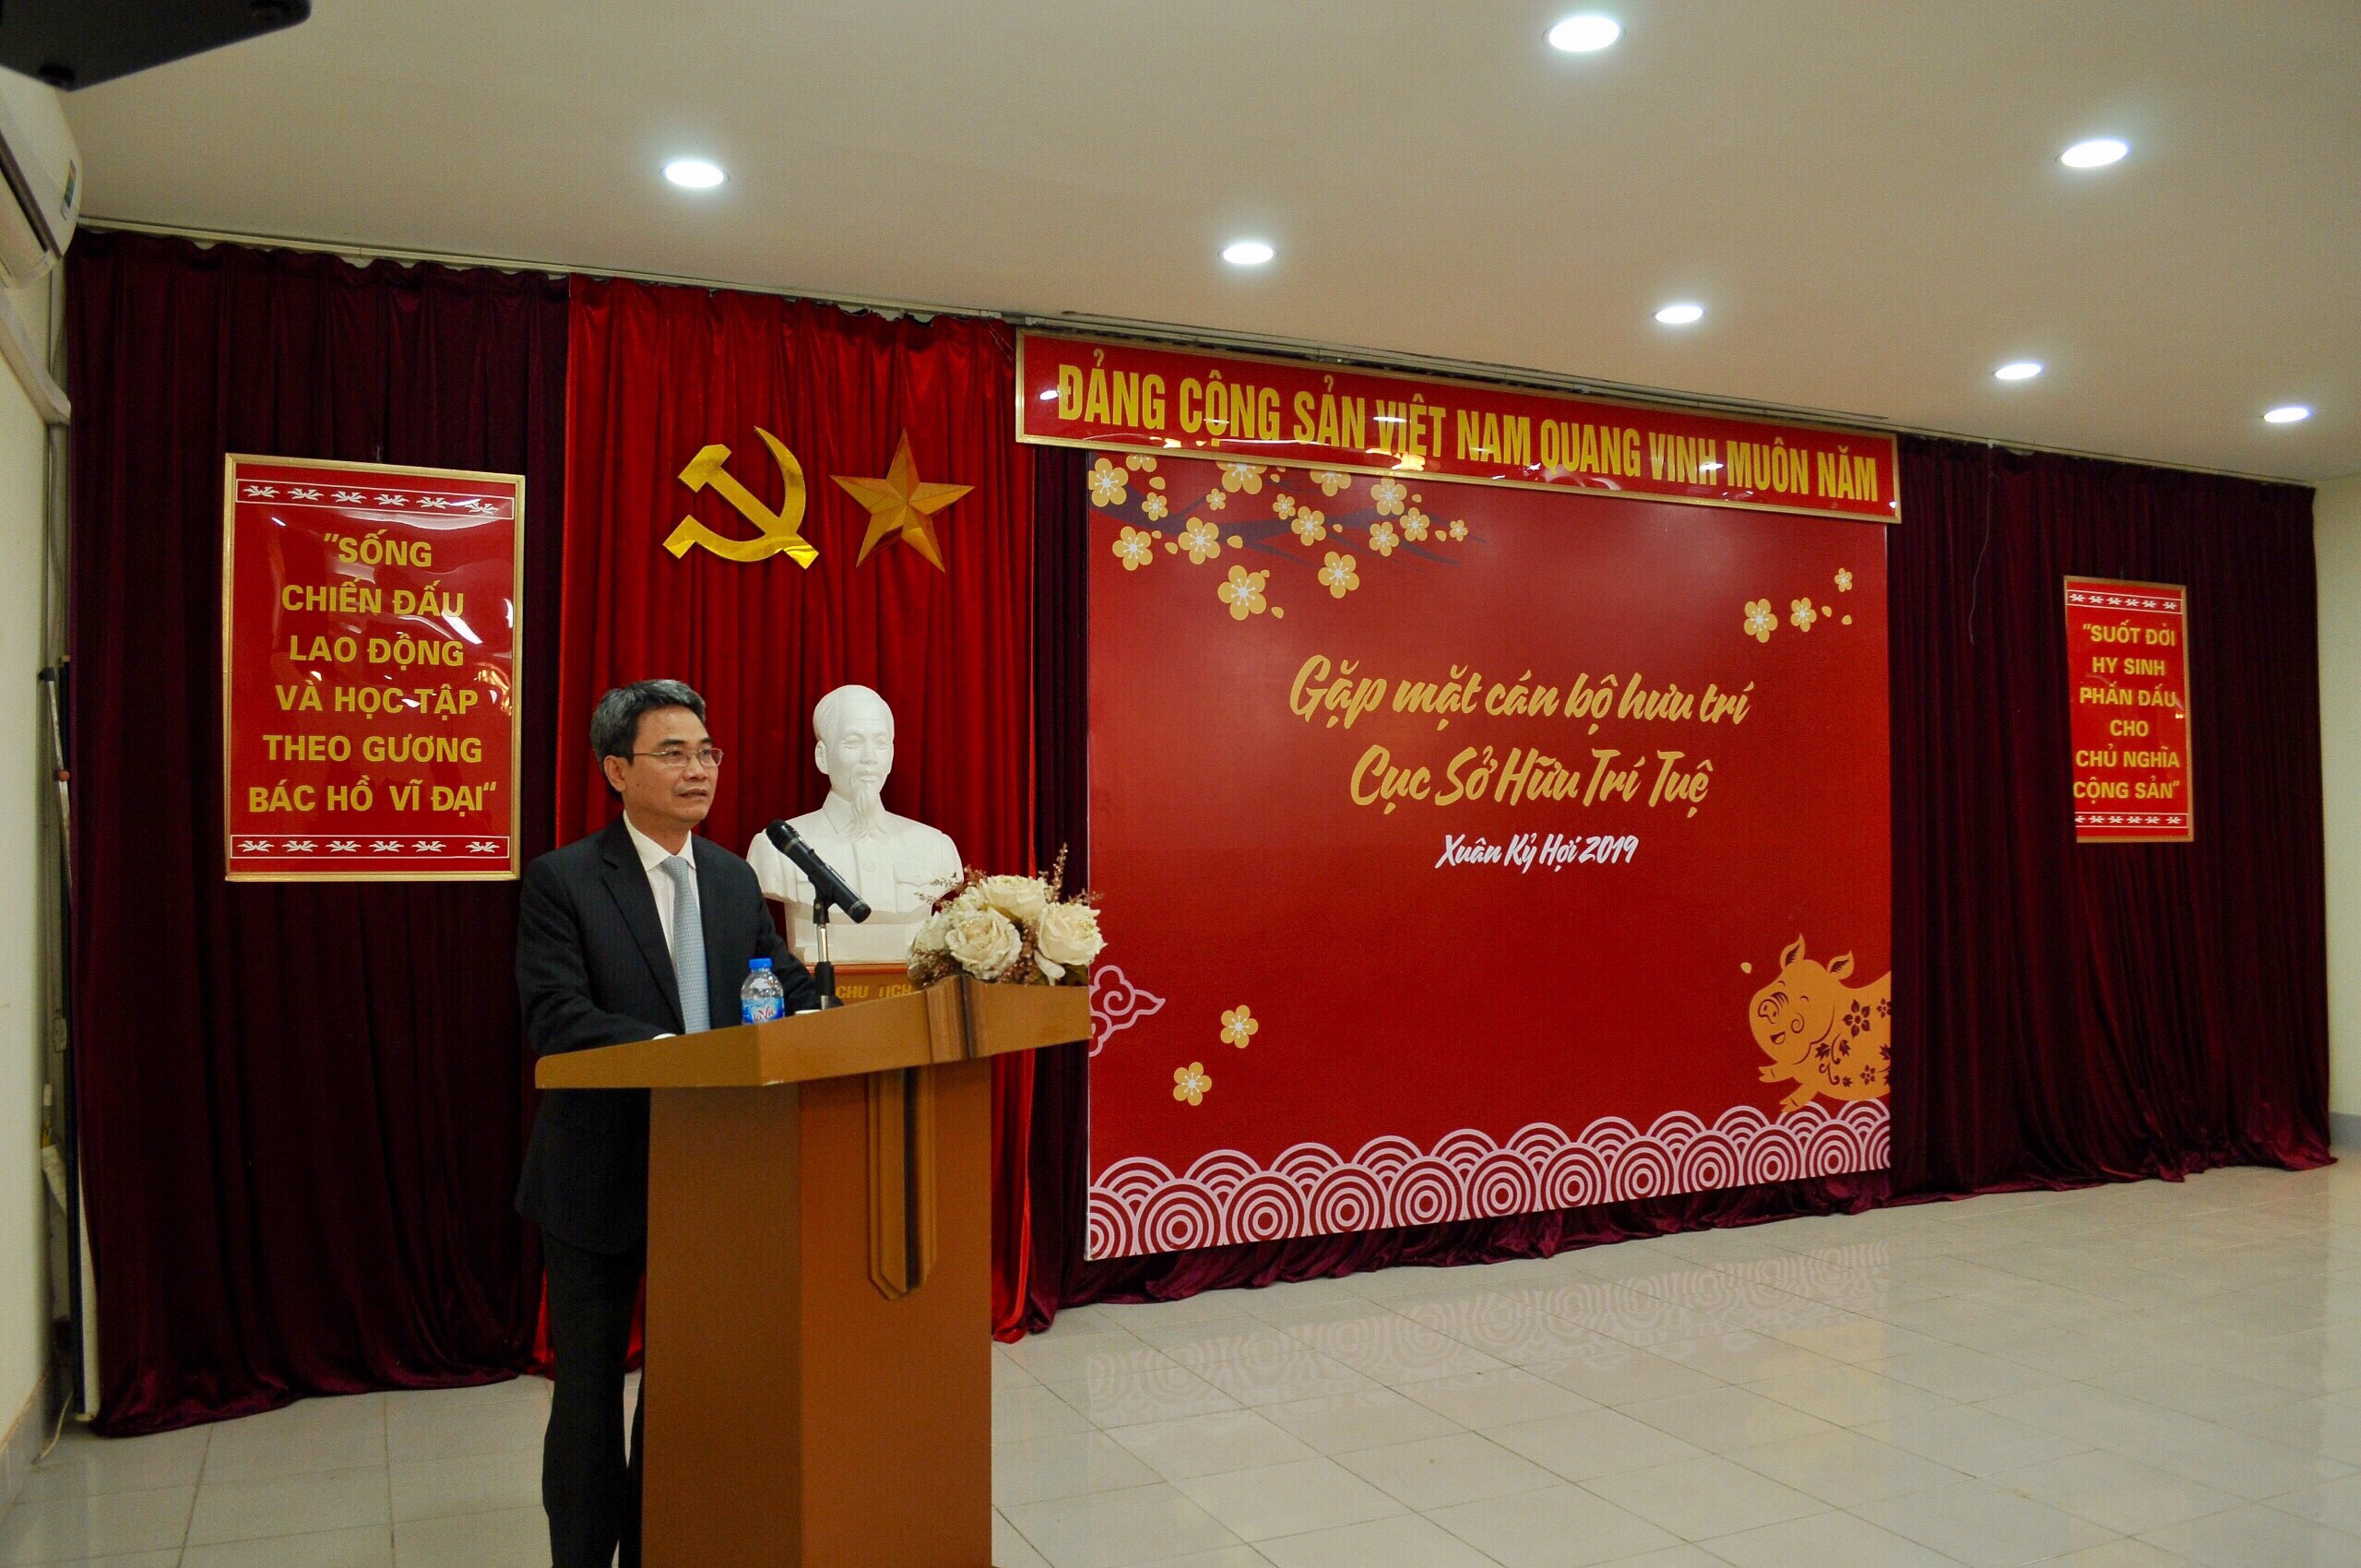 Mr. Đinh Hữu Phí, Director, speaking at the Meeting